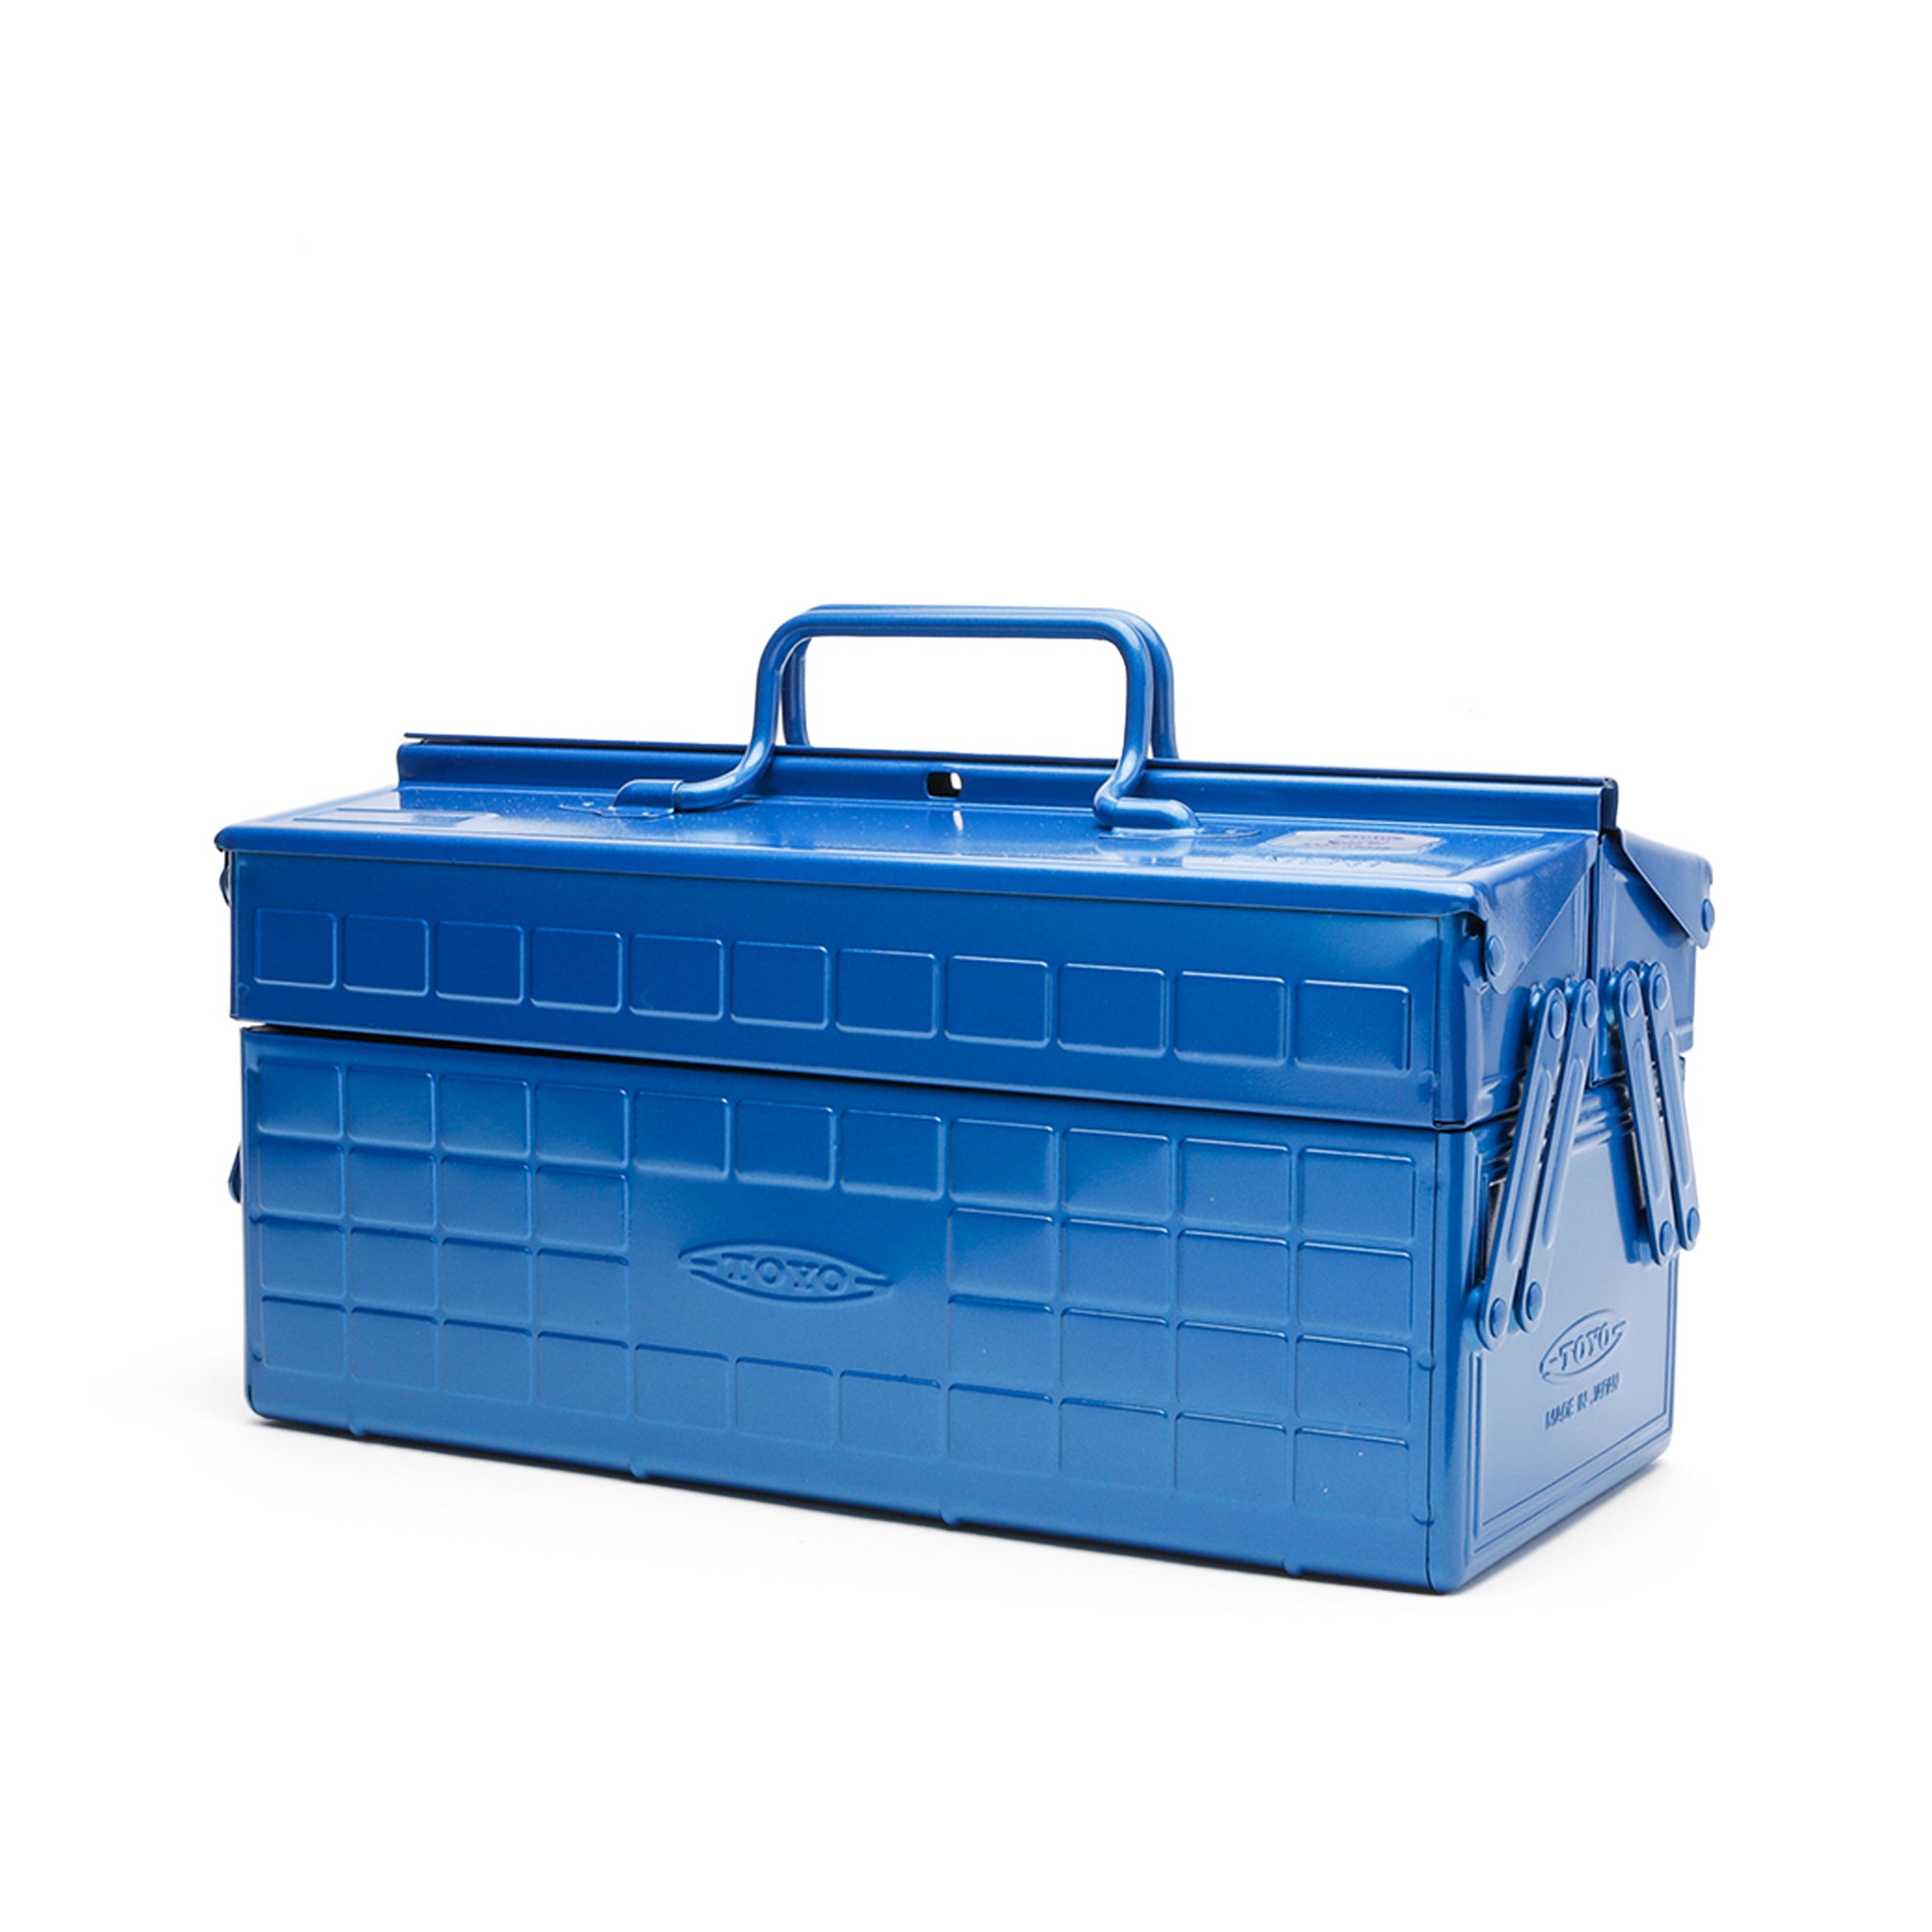 Blue Toyo Steel Toolbox | Cantilever Lid | Upper Storage Trays, Style ST-350